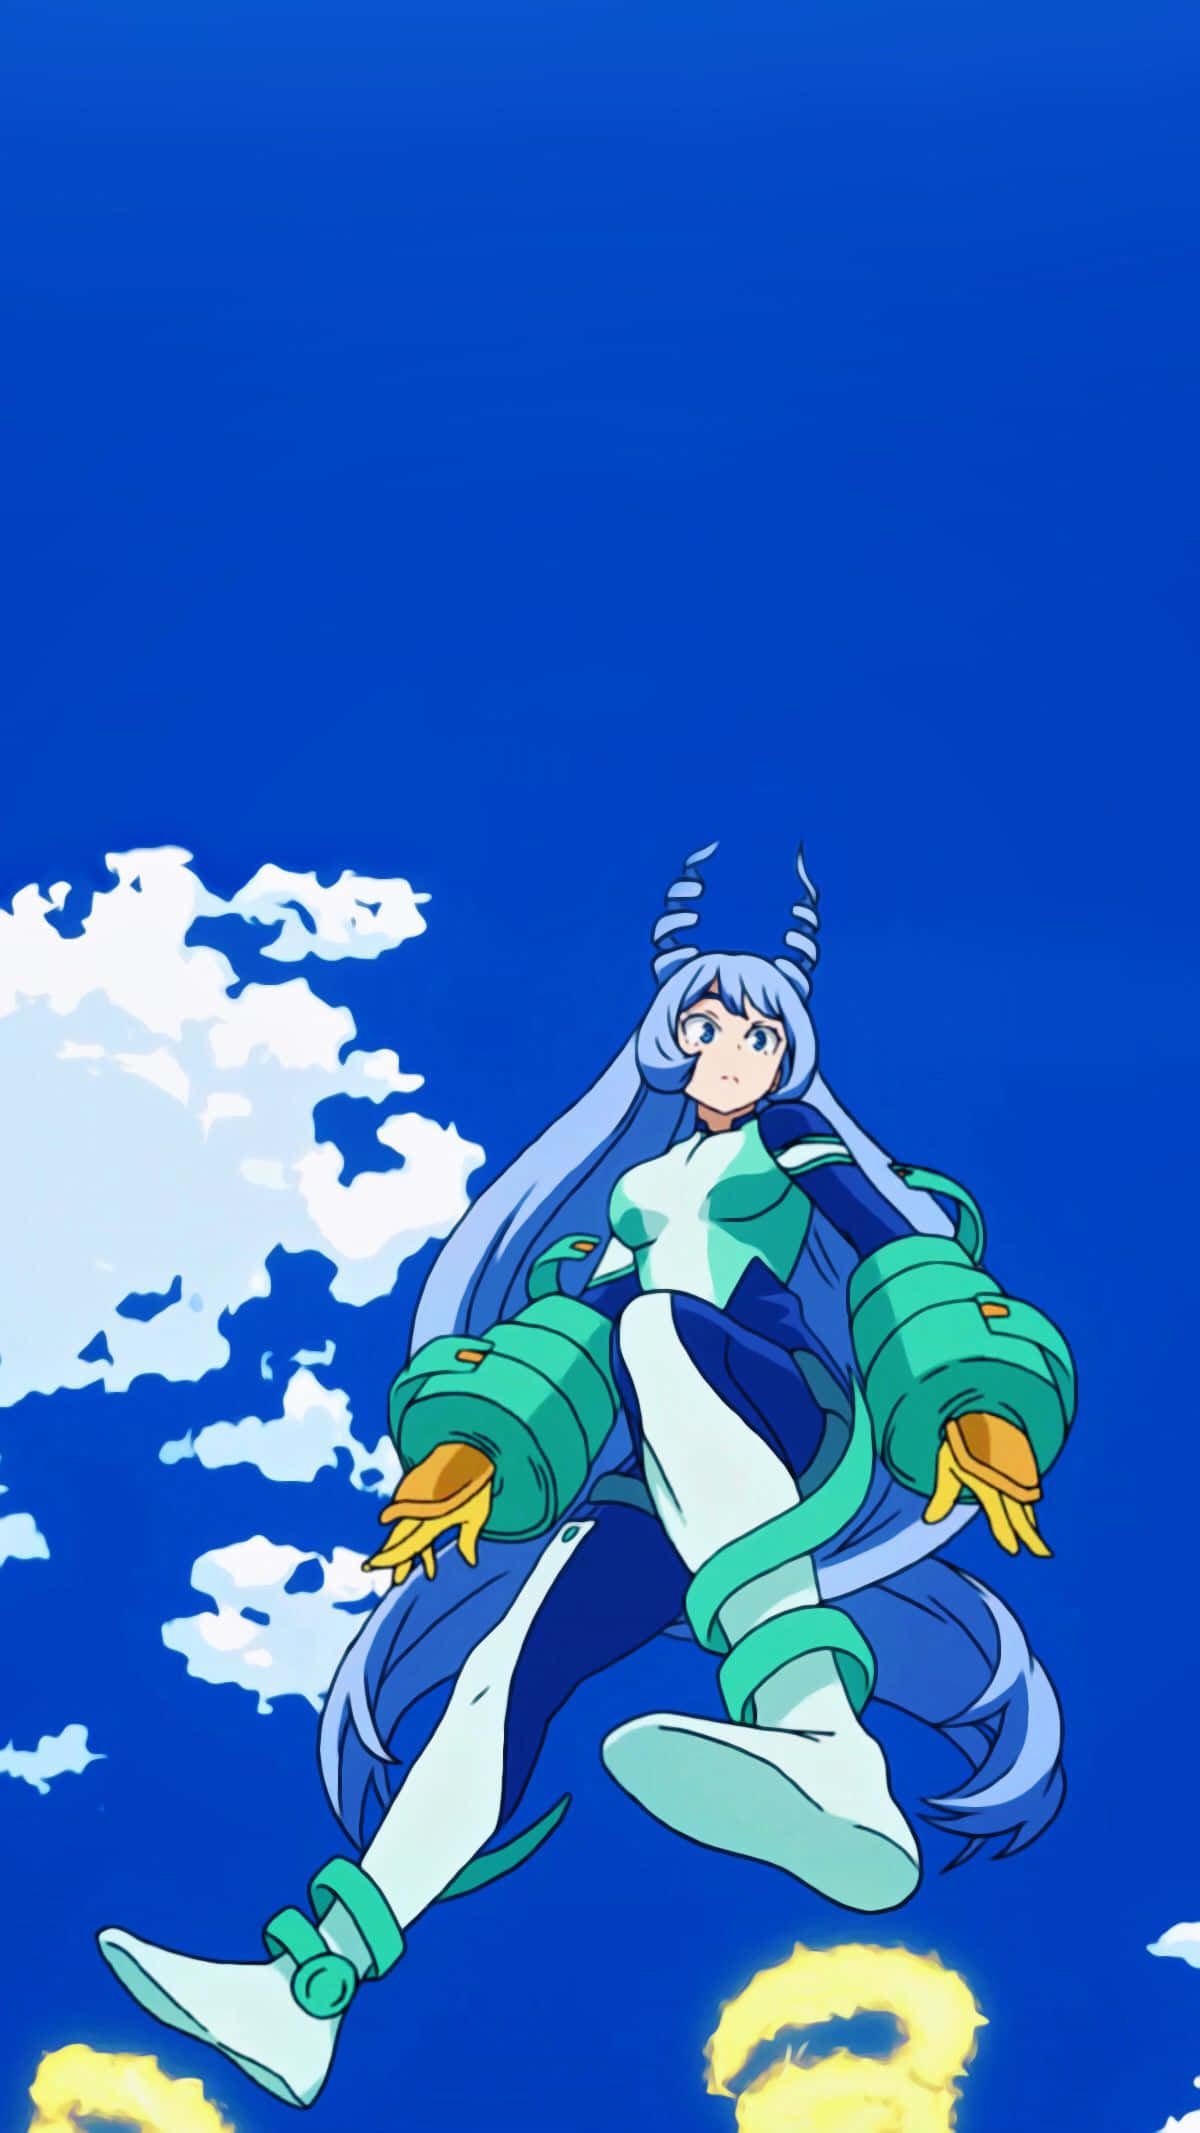 Nejire Hado, an eighth-grader with the powerful quirk of Electricity." Wallpaper